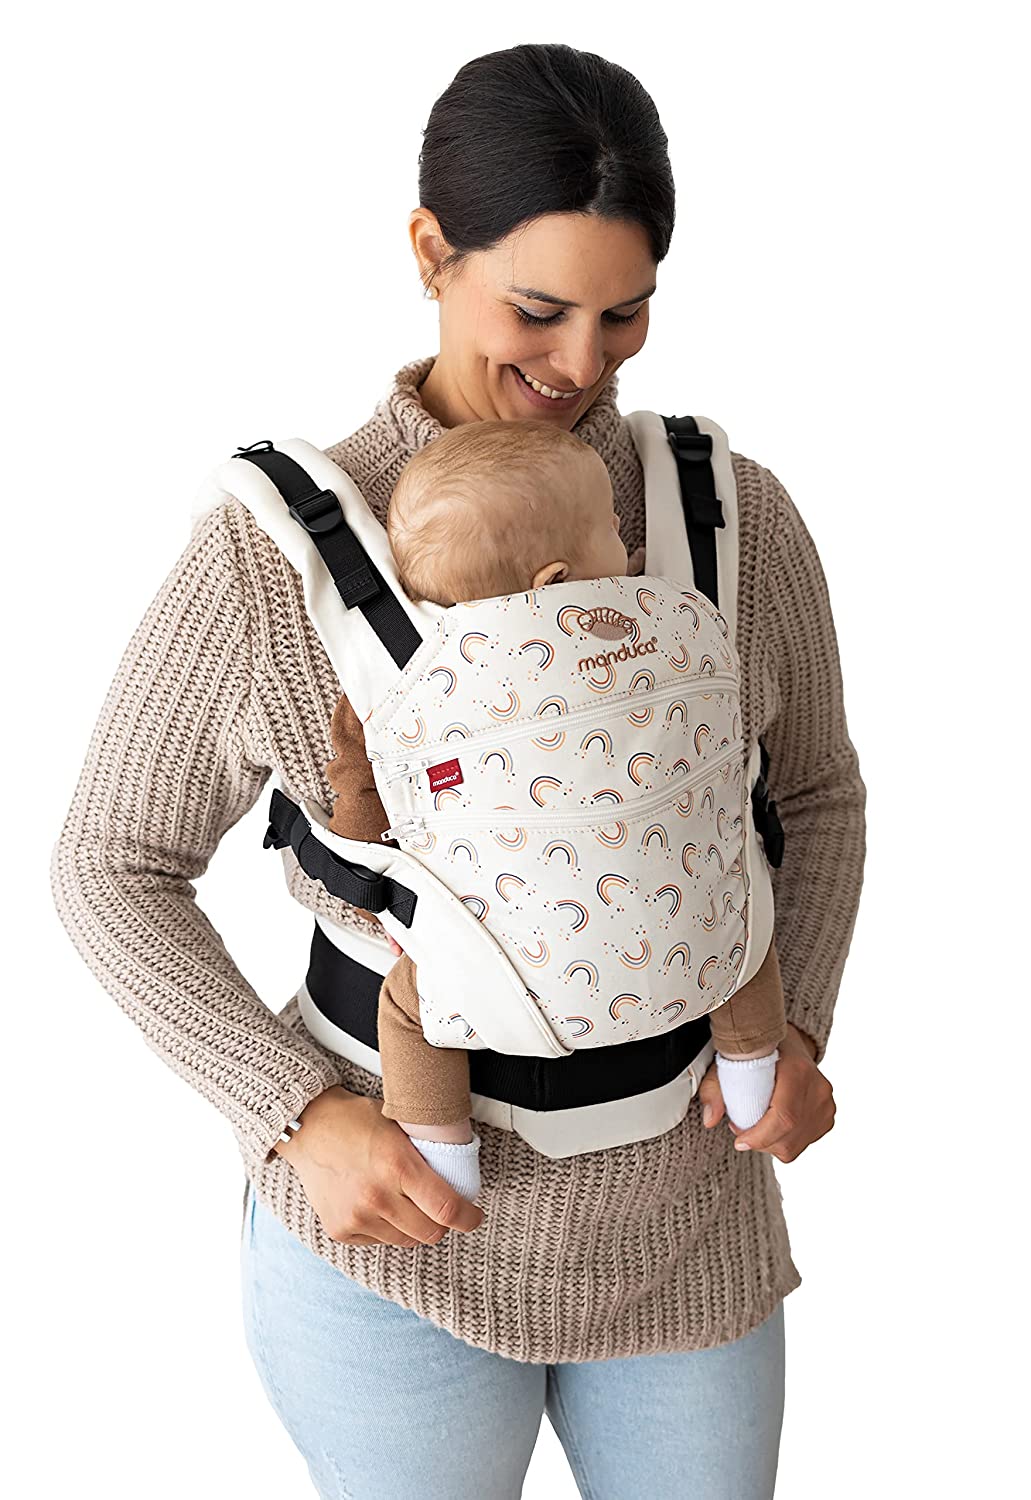 manduca XT Baby Carrier < All-In-One Baby Carrier for Newborns from Birth, Babies & Toddlers (3.5-20 kg), Adjustable Seat, 3 Carrying Positions, Organic Cotton (XT Limited Edition, RainbowDay)